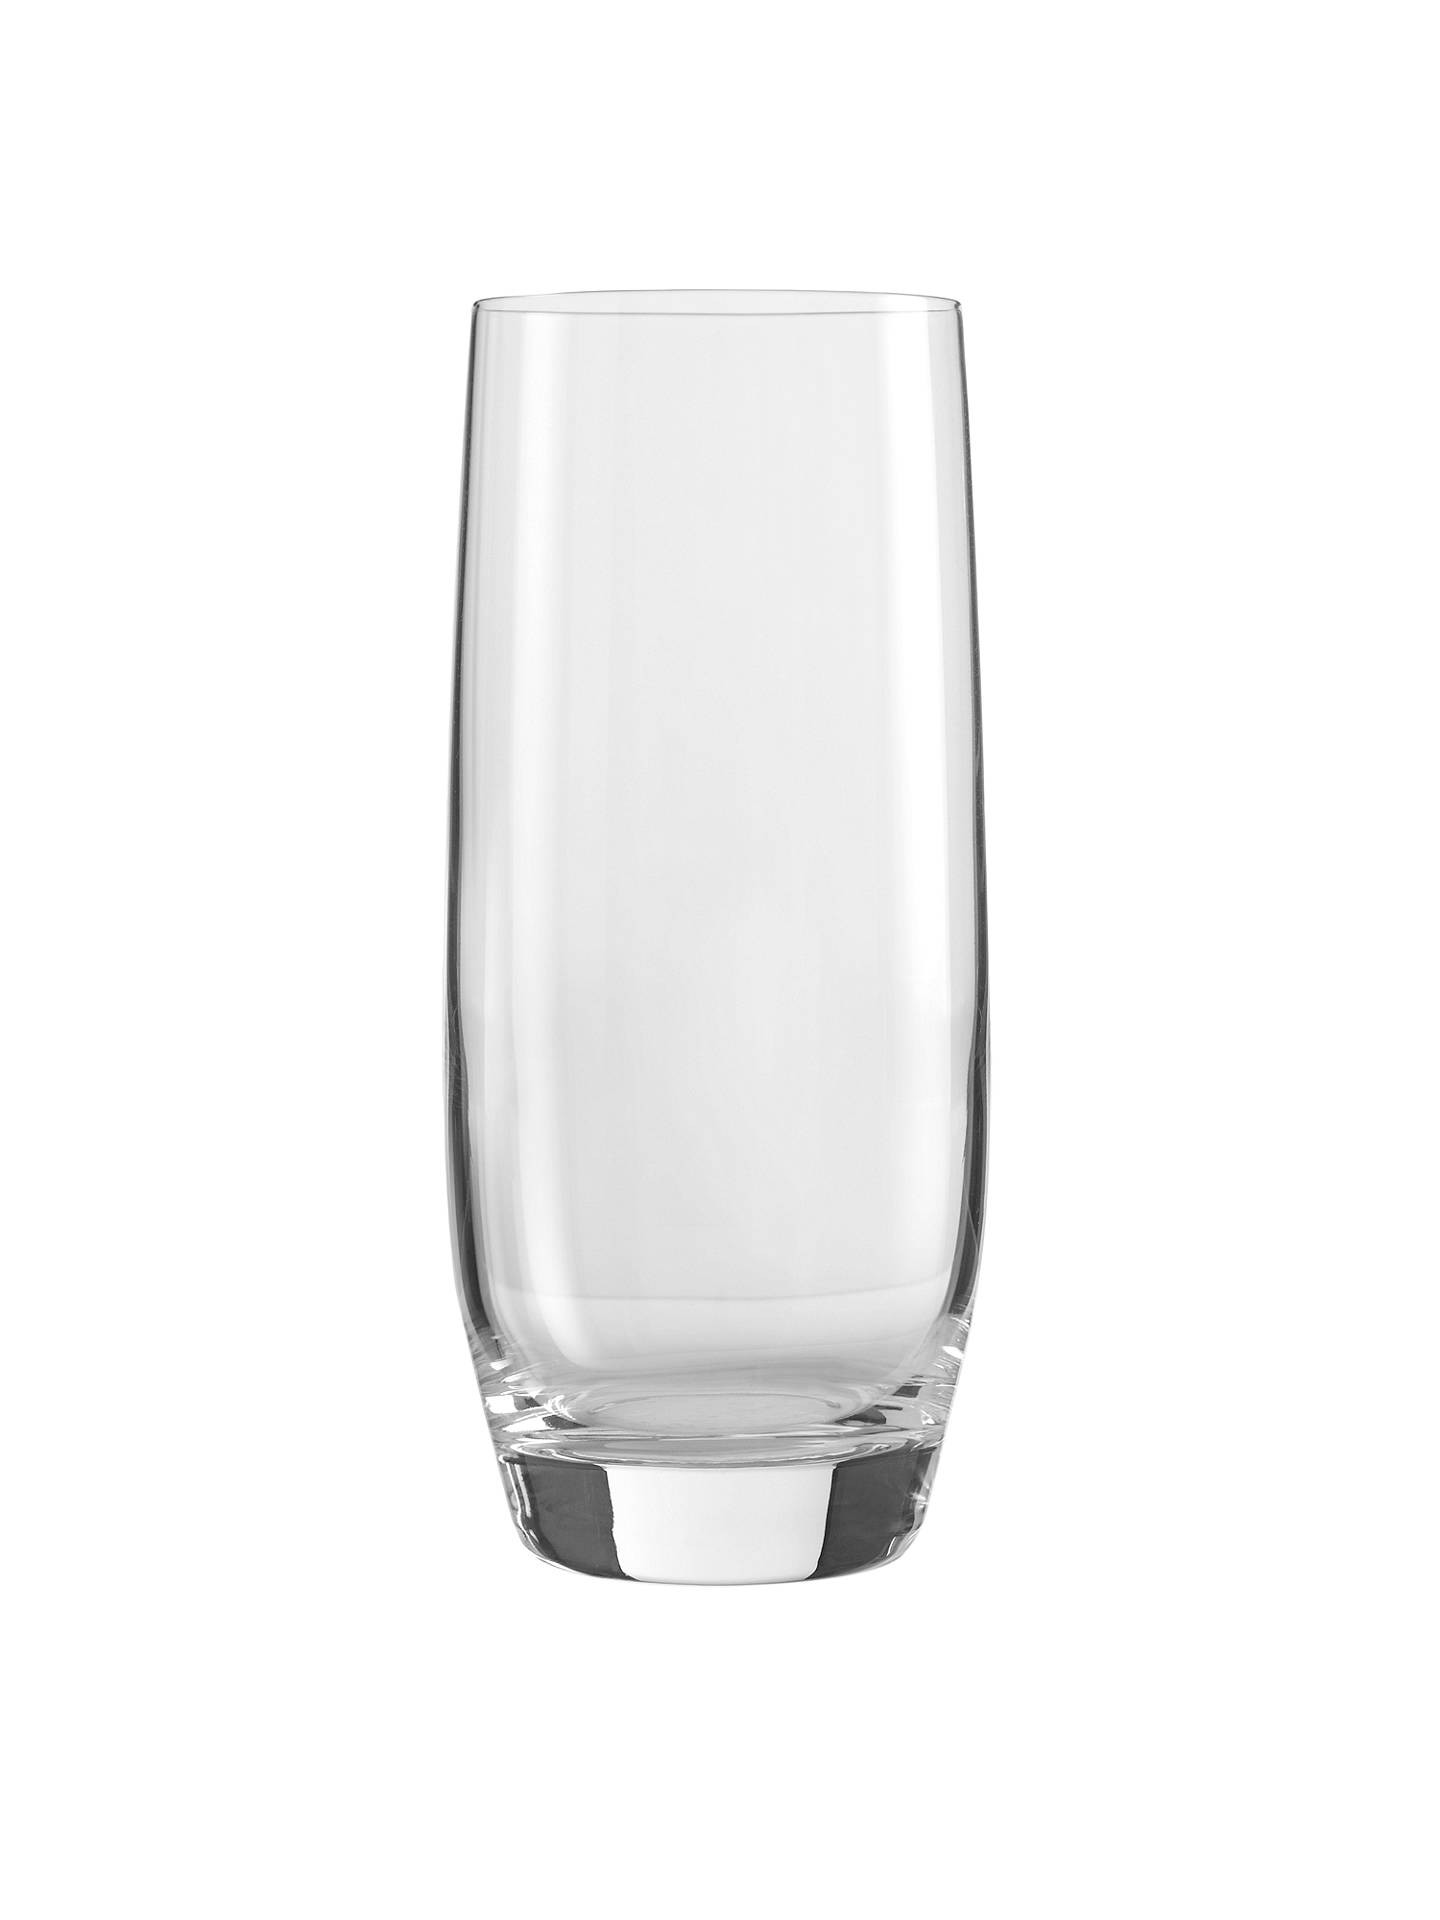 tall wide glass vase of john lewis partners connoisseur highballs set of 4 clear 450ml inside buyjohn lewis partners connoisseur highballs set of 4 clear 450ml online at